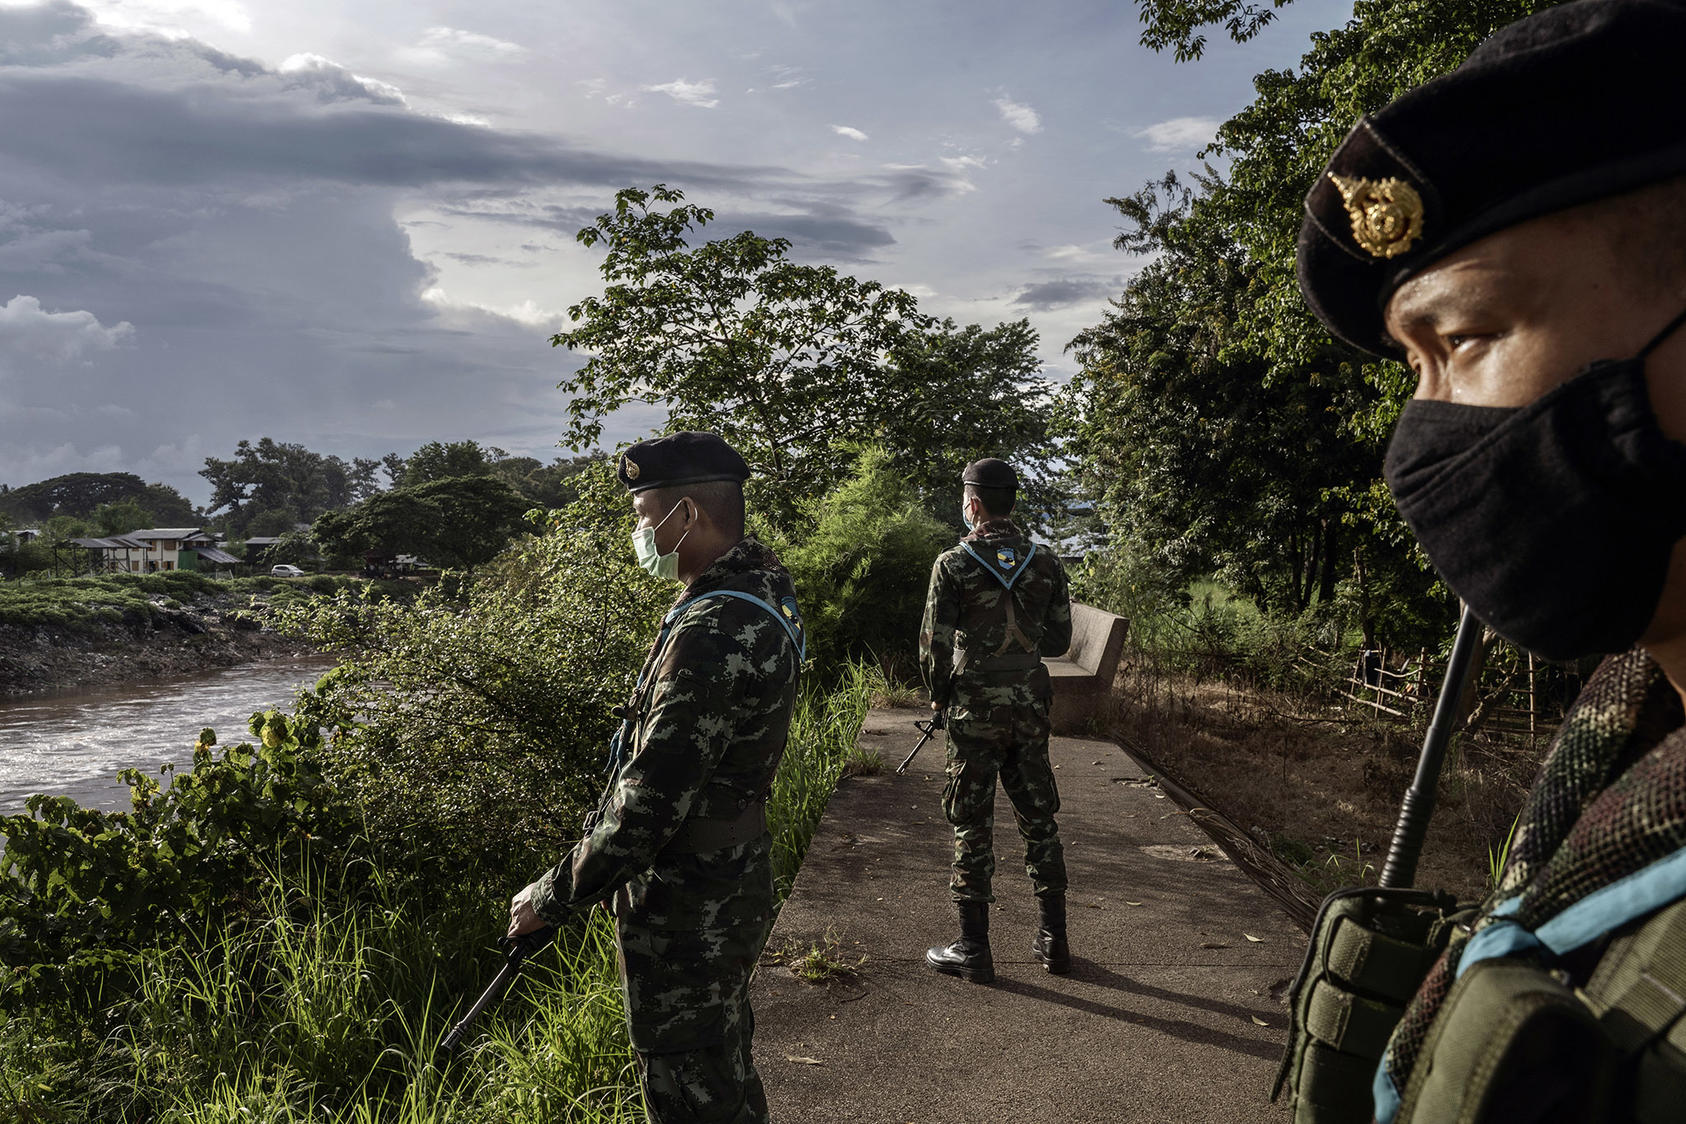 Thai solders on patrol in the border town of Mae Sot, which sits directly across the Moei River from Myawaddy, Myanmar, on Sept. 28, 2020. (Adam Dean/The New York Times)